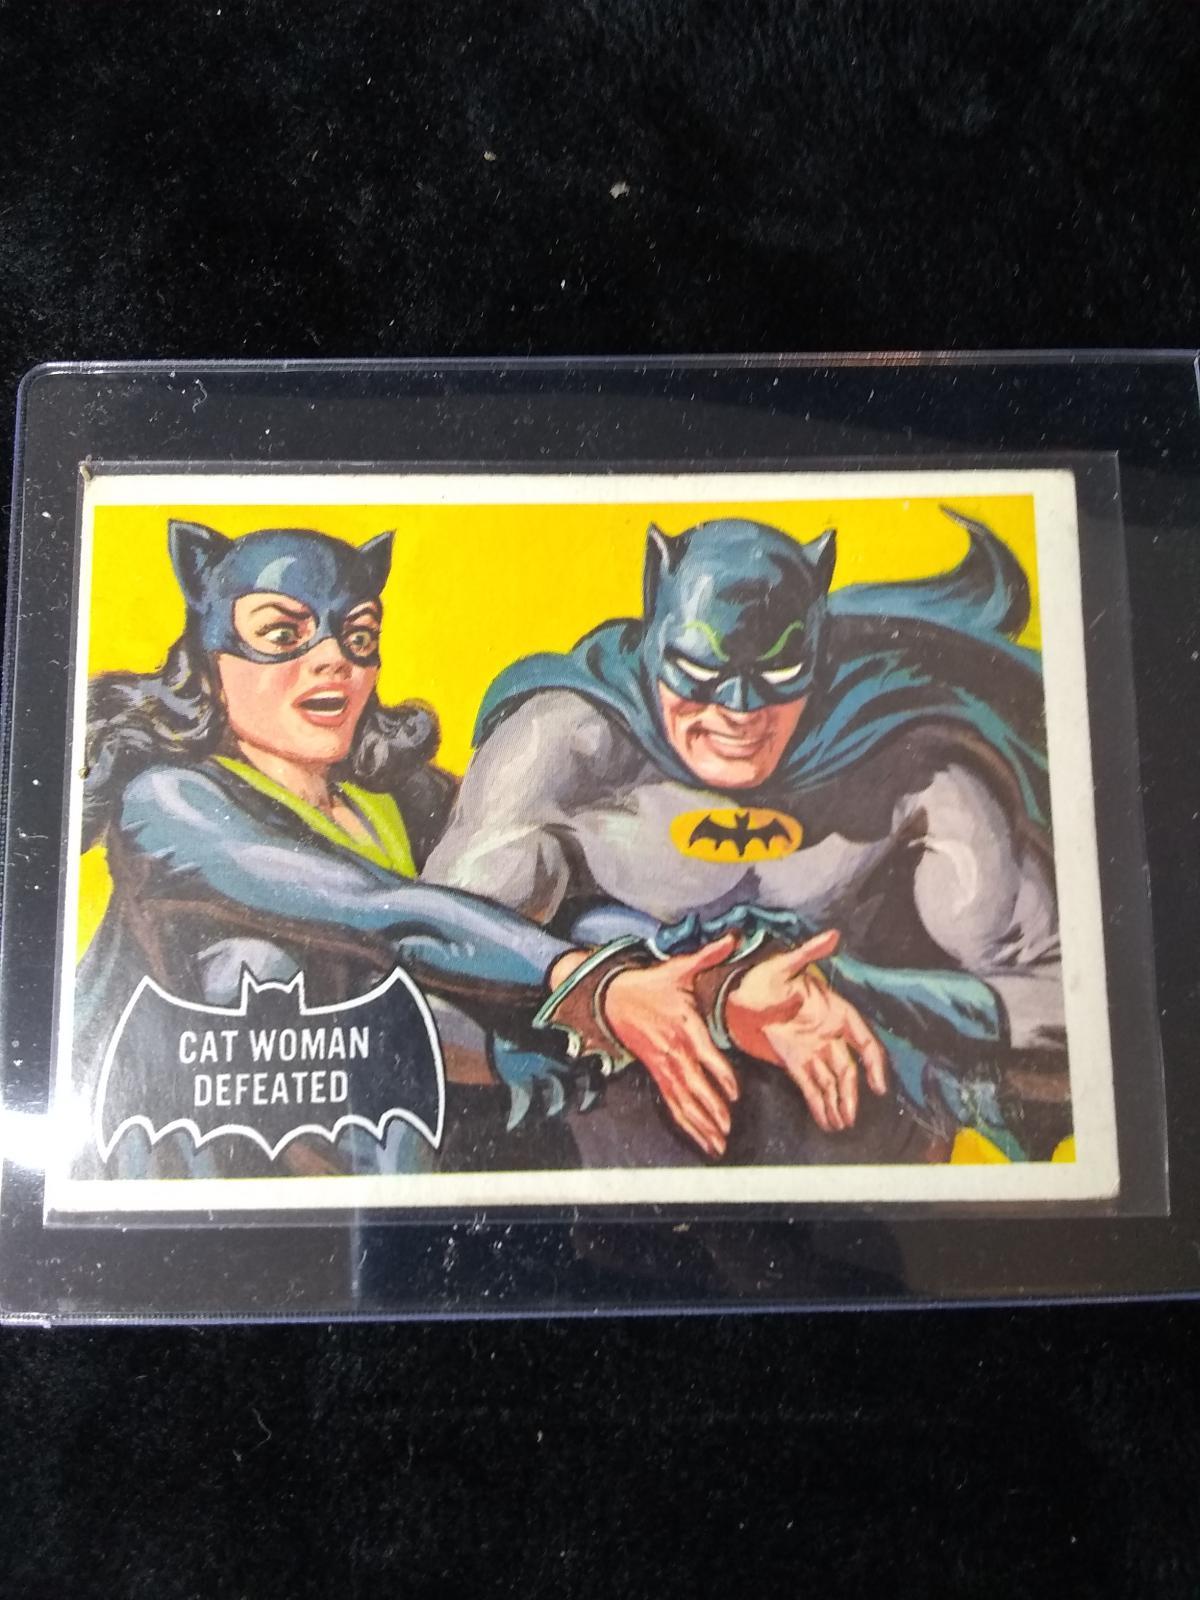 Uncertified Trading Card -Batman - Catwoman Defeated